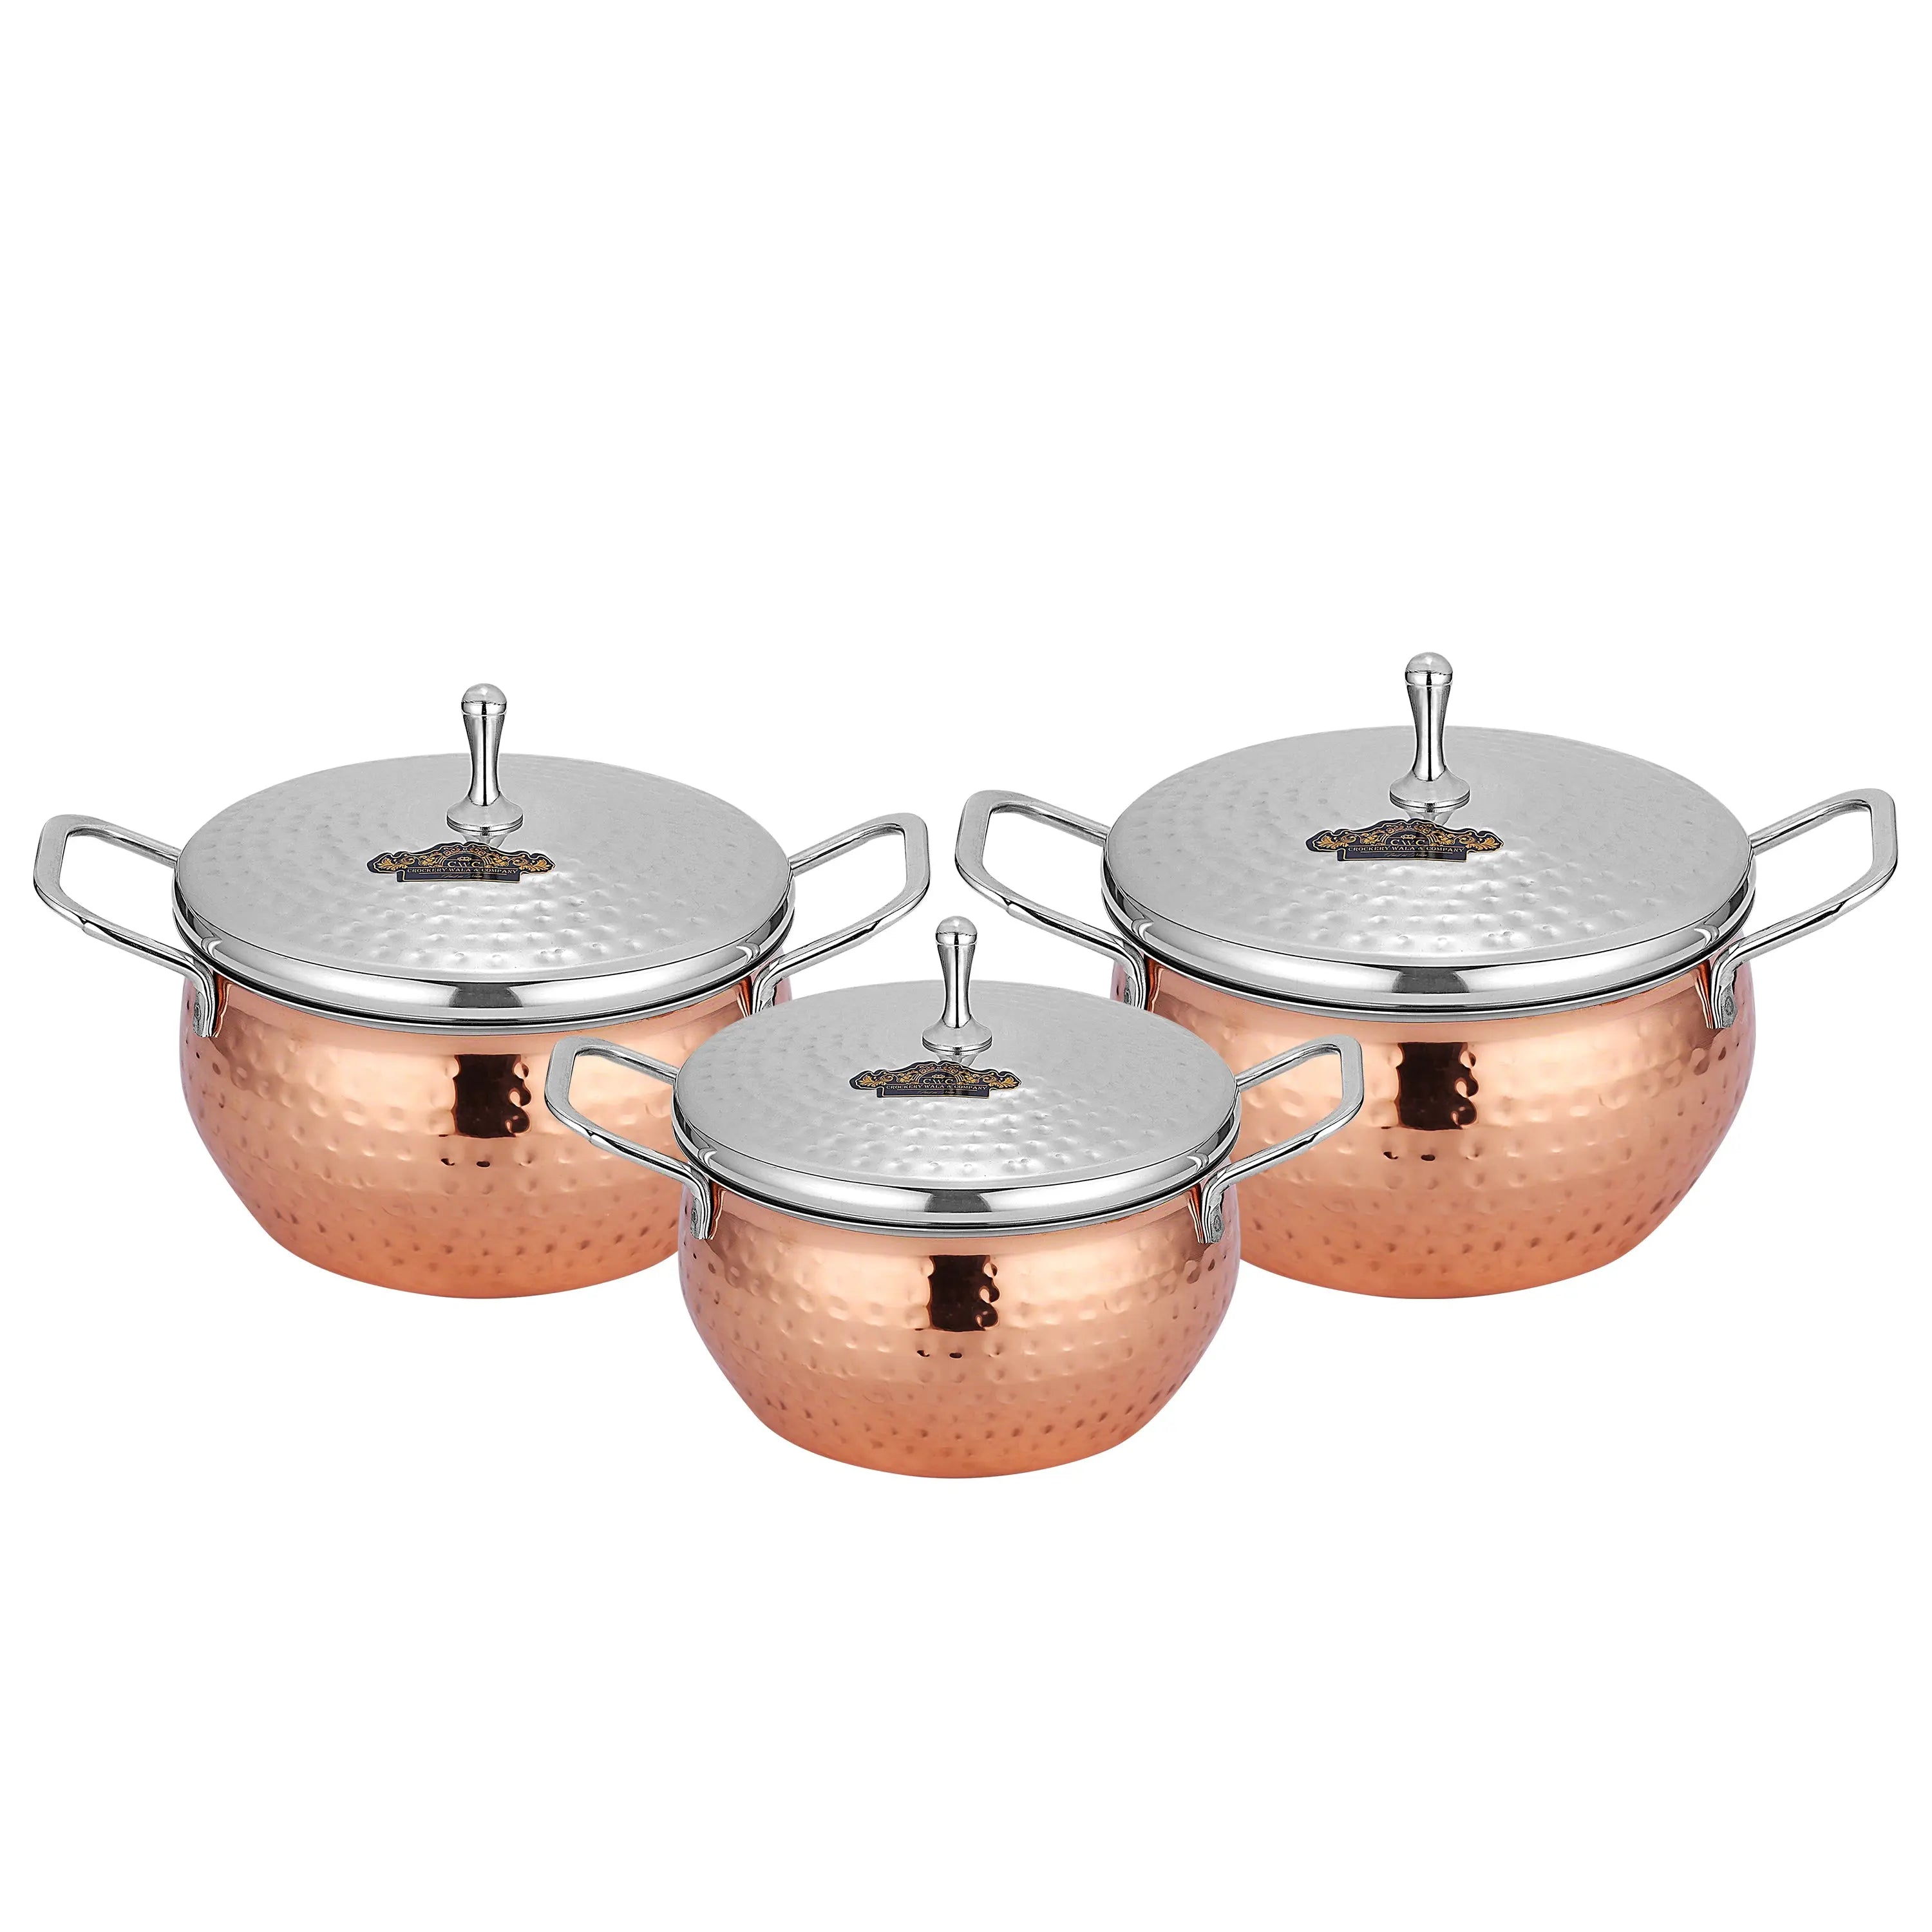 STAINLESS STEEL COPPER PVD PINACLE HANDI SET-3 PCS - CROCKERY WALA AND COMPANY 